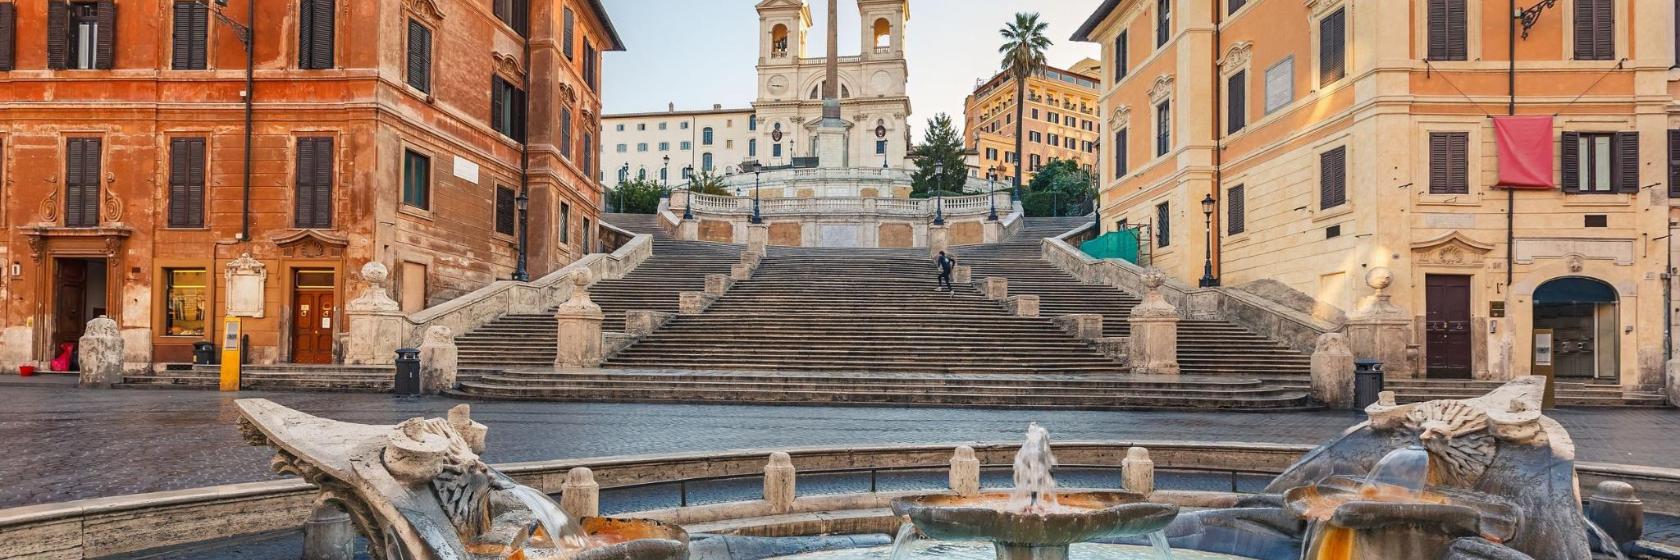 The 10 best hotels near Spanish Steps in Rome, Italy